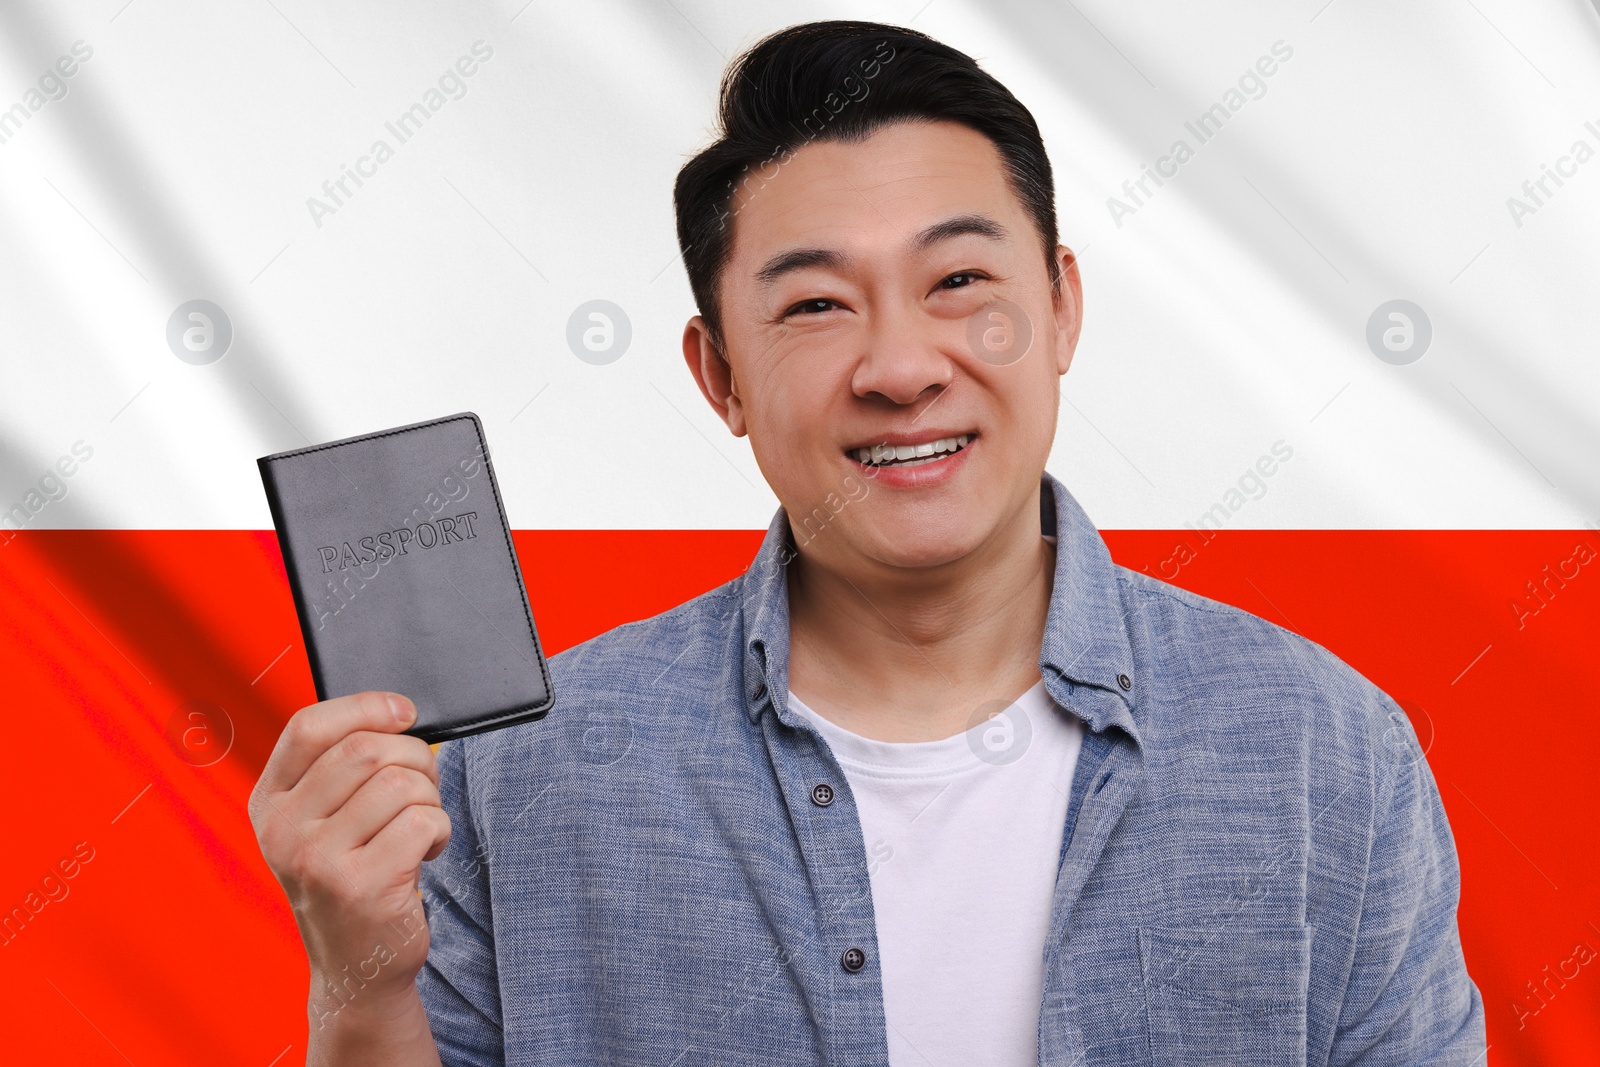 Image of Immigration. Happy man with passport against national flag of Poland